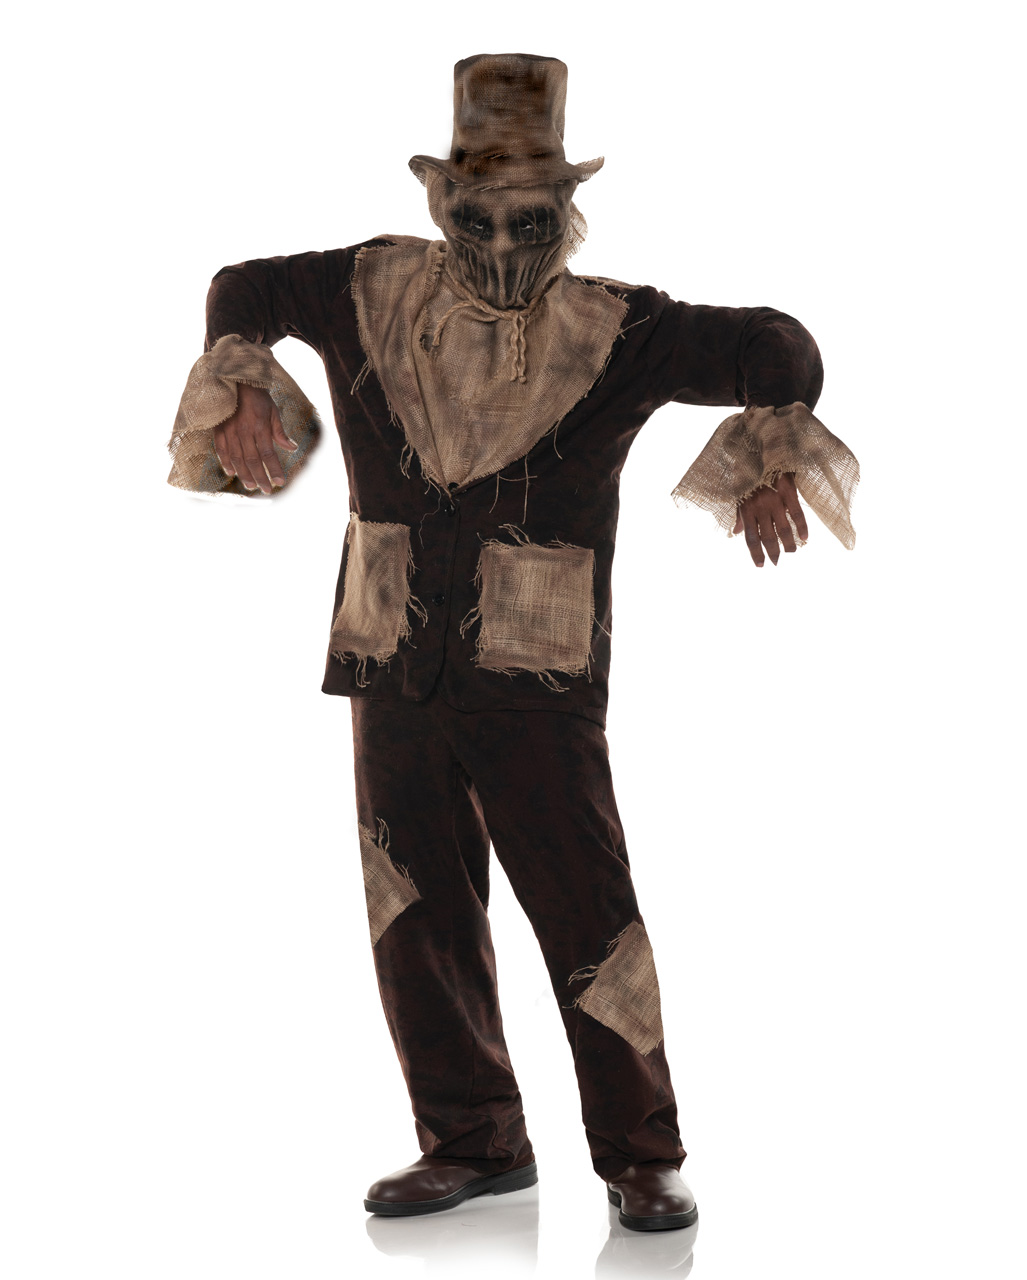 Scary Scarecrow Costume as a Halloween costume